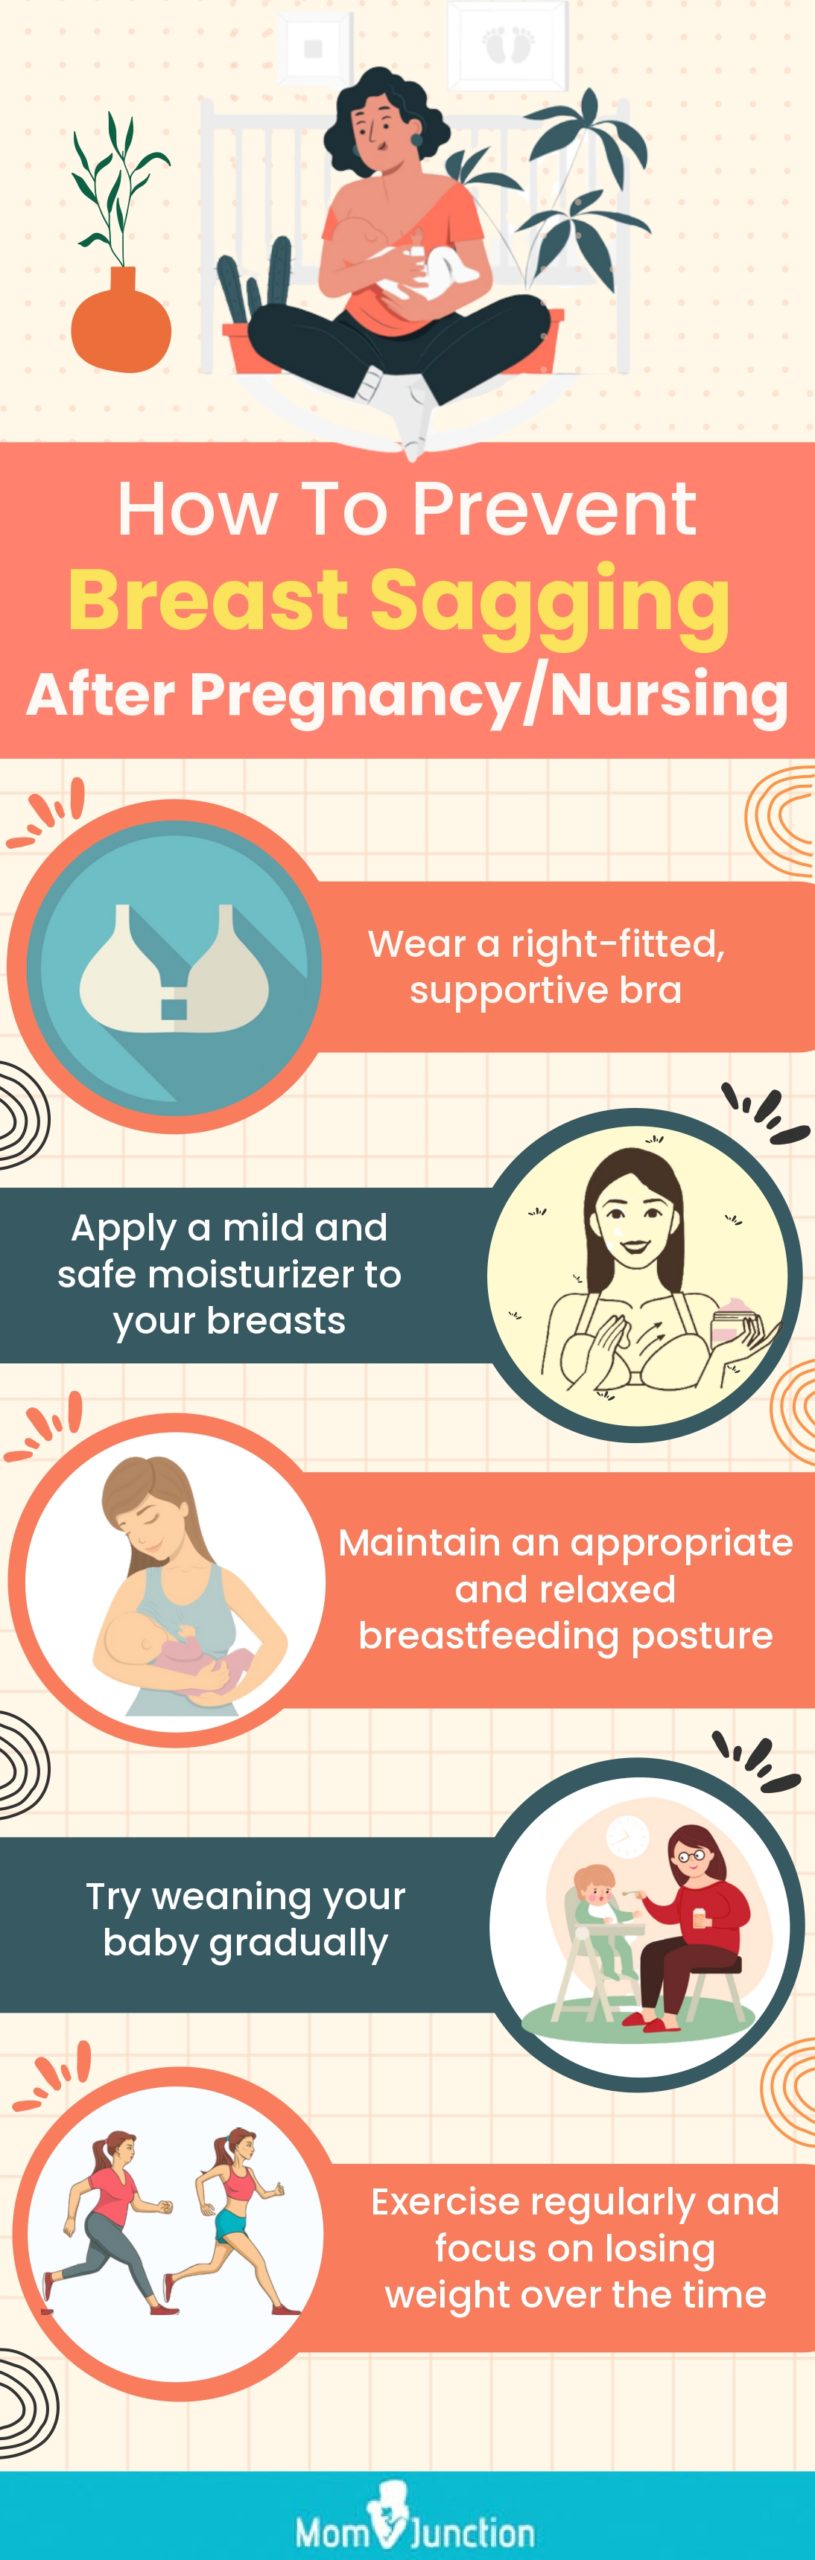 how to prevent breast sagging after pregnancy/nursing [infographic]